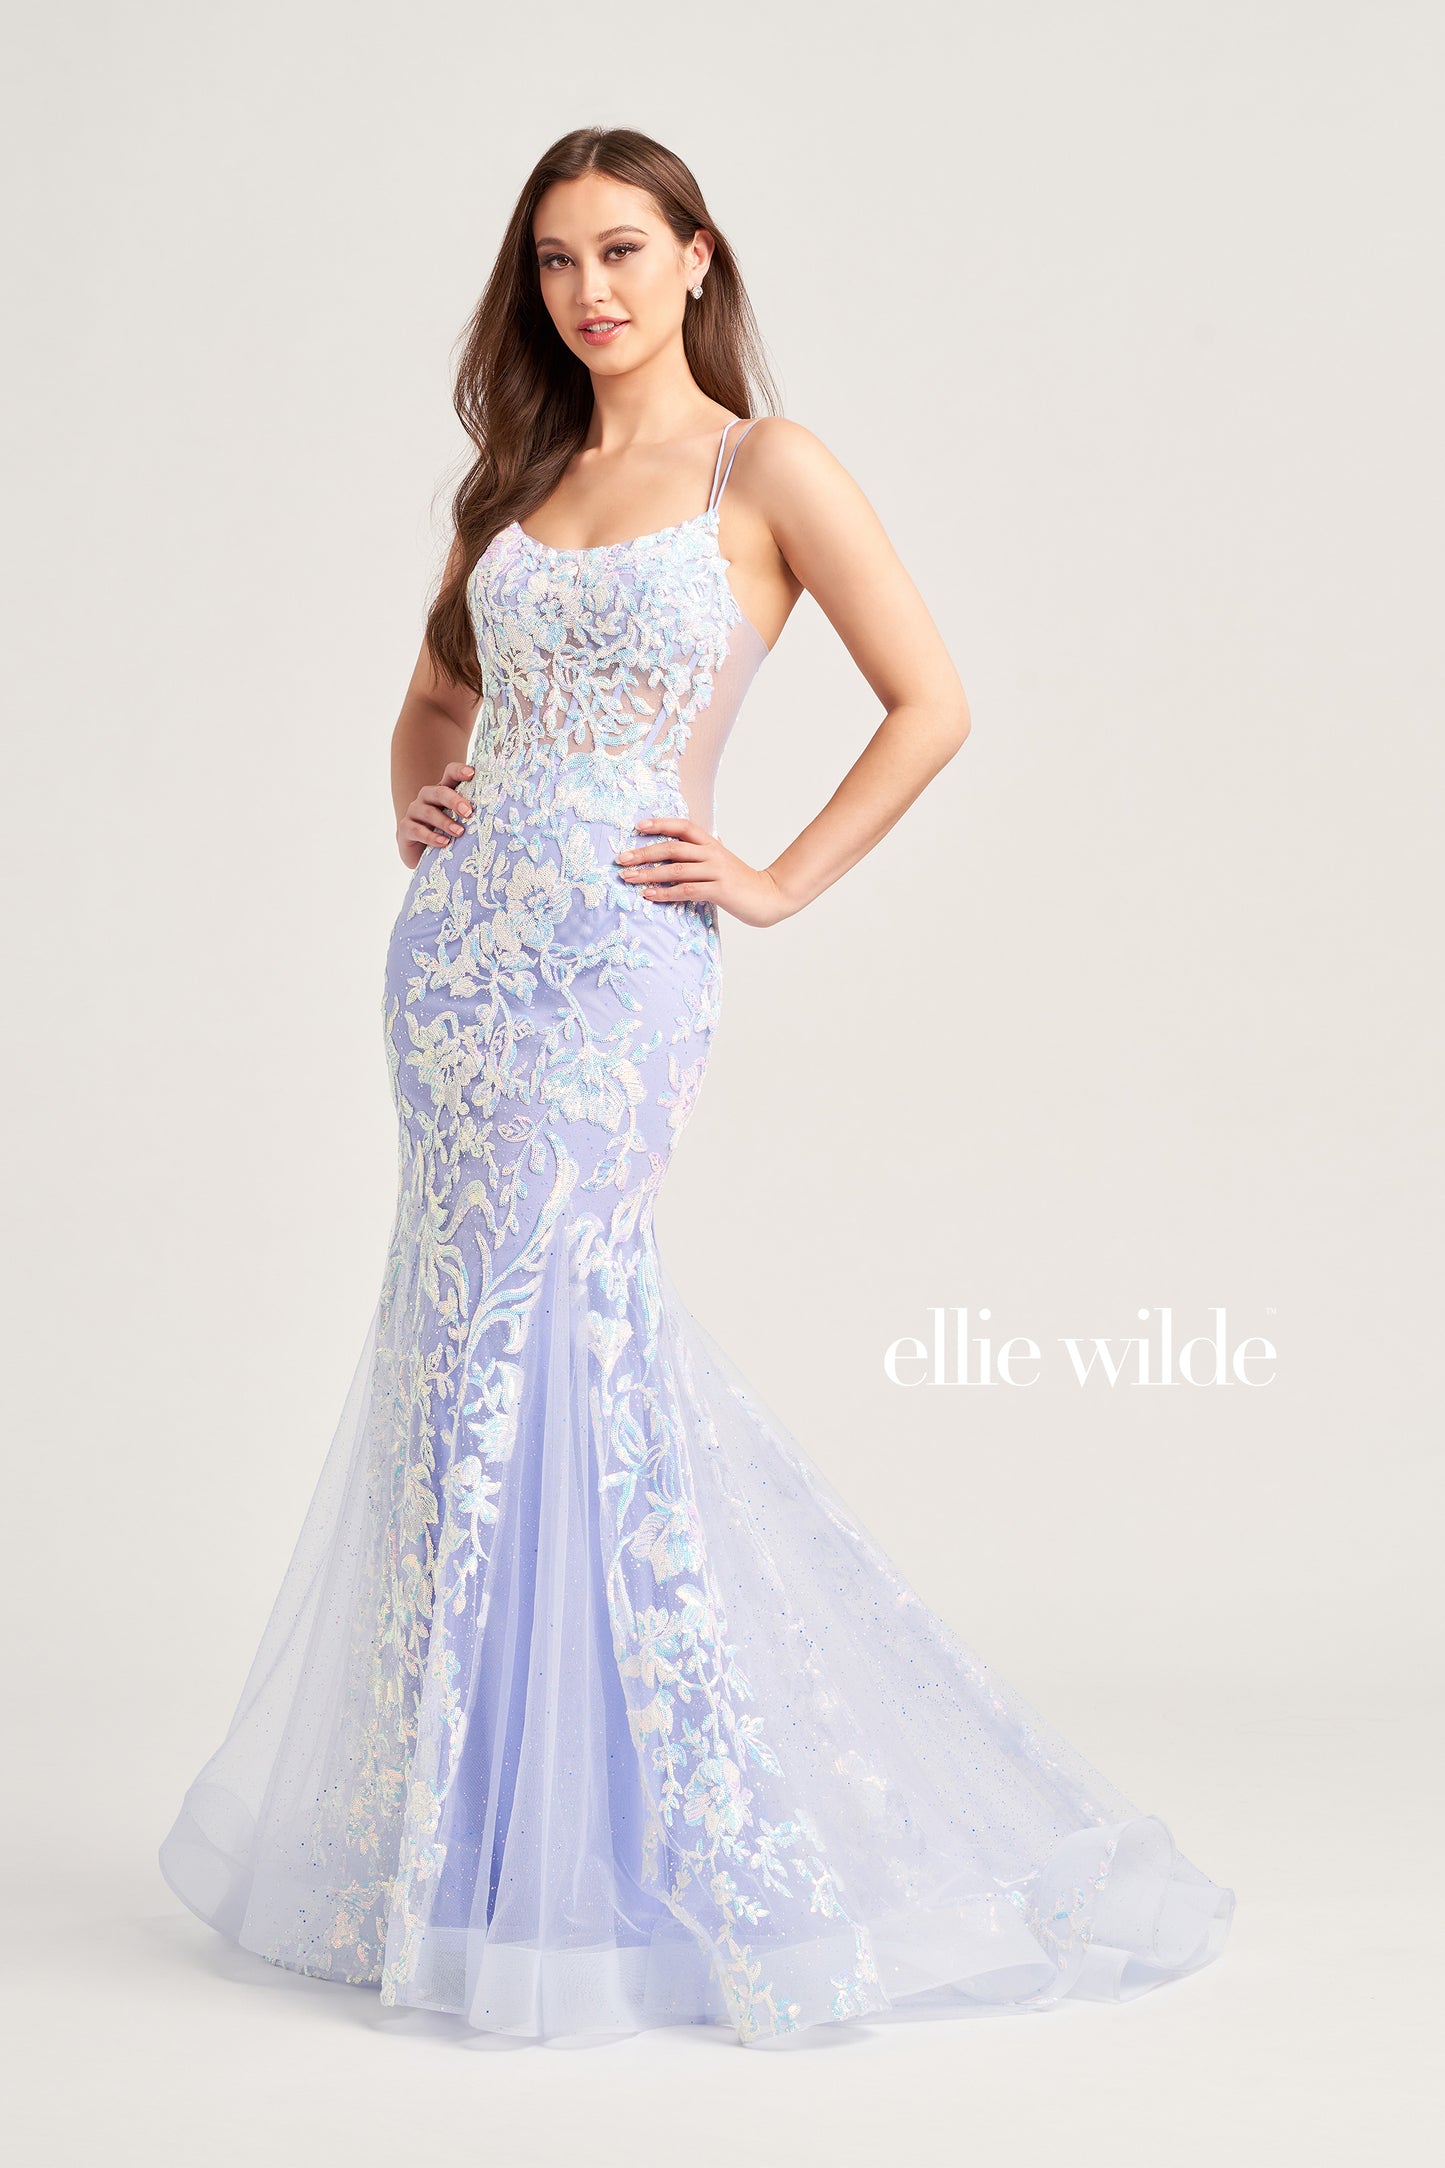 Show up in style with the Ellie Wilde EW35008 Long Sequin Shimmer Mermaid Prom Dress. Made with Glitter Sequin Tulle, this elegant gown has a Scoop Neckline, Sleeveless sleeves, Lace-Up back, and a Natural Waistline. Experience maximum comfort with the Side Waist Mesh Inset and Mermaid silhouette. Show off your curves in this figure-hugging dress!  COLOR: ORANGE, MAGENTA, ULTRA VIOLET, PERIWINKLE/OPAL SIZE: 00 - 20